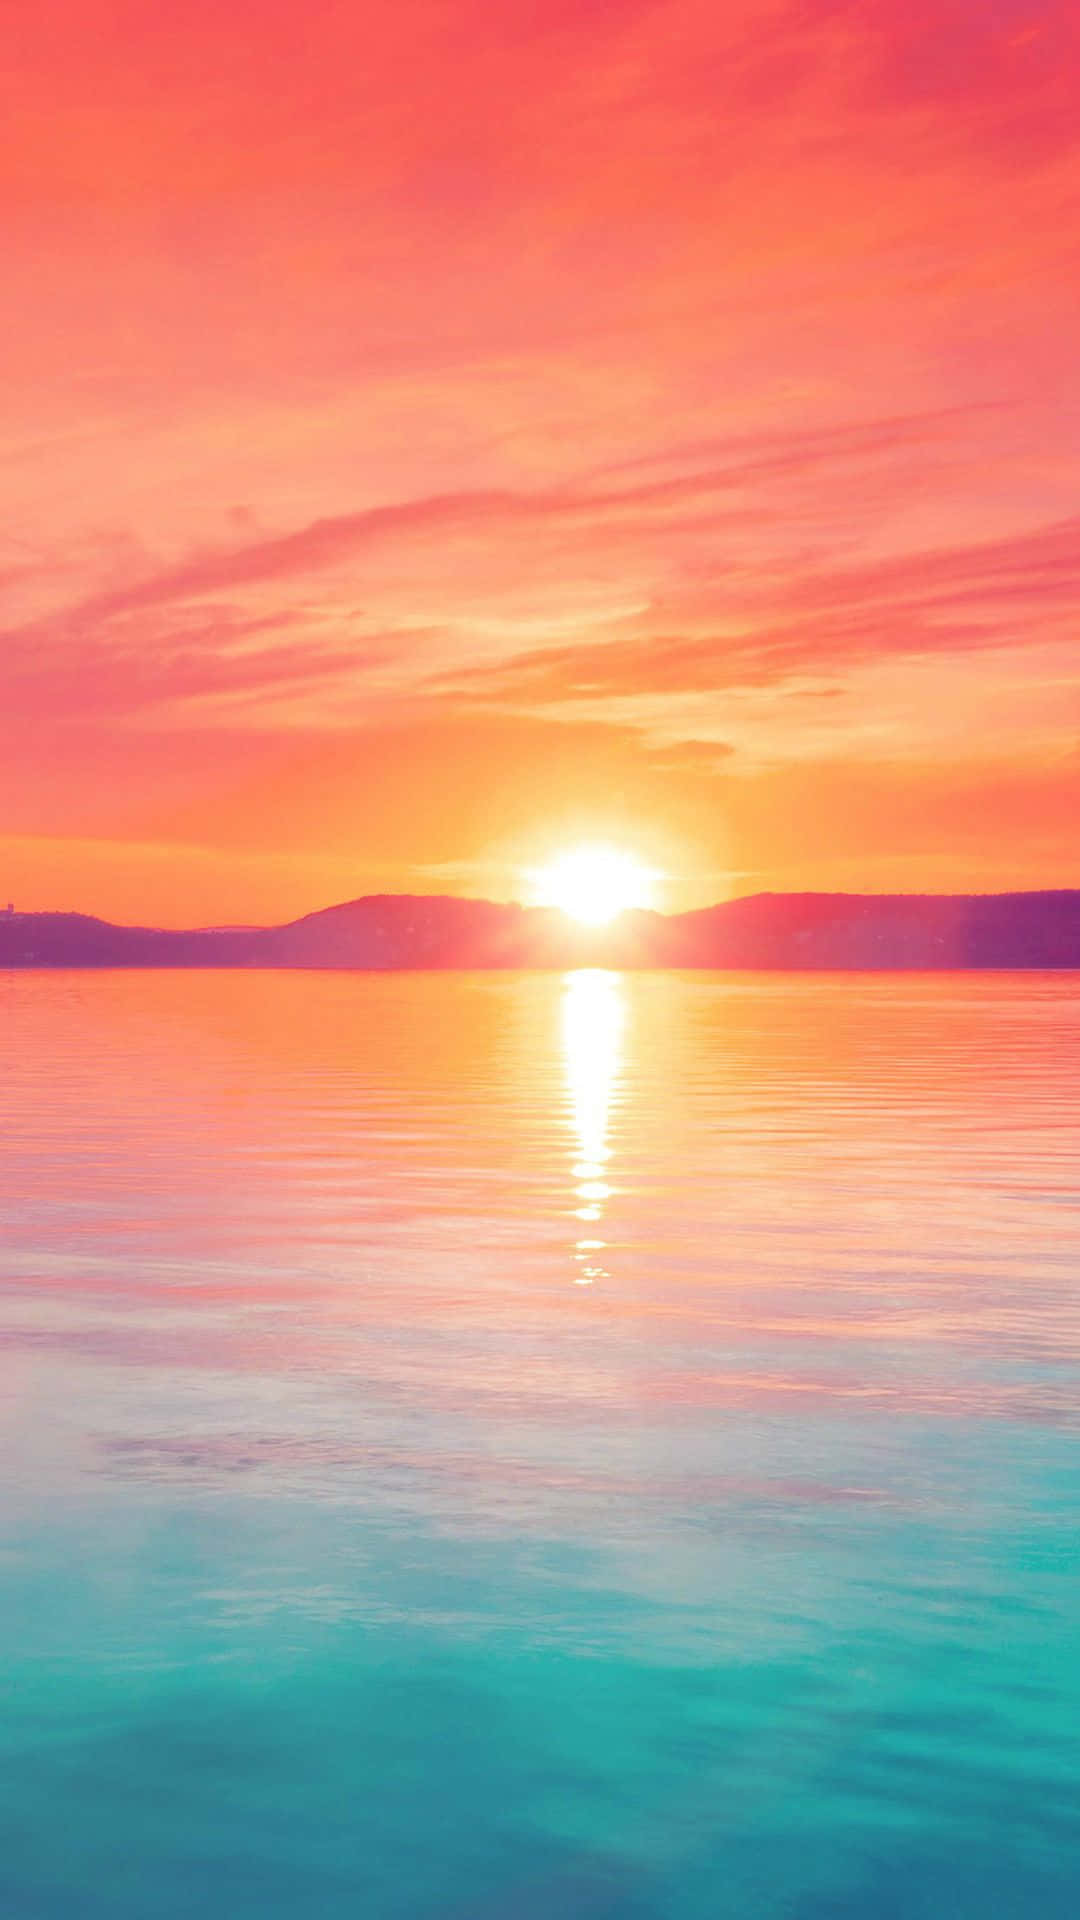 Aesthetic Sunset Iphone With Sun Reflecting On Blue Ocean Wallpaper